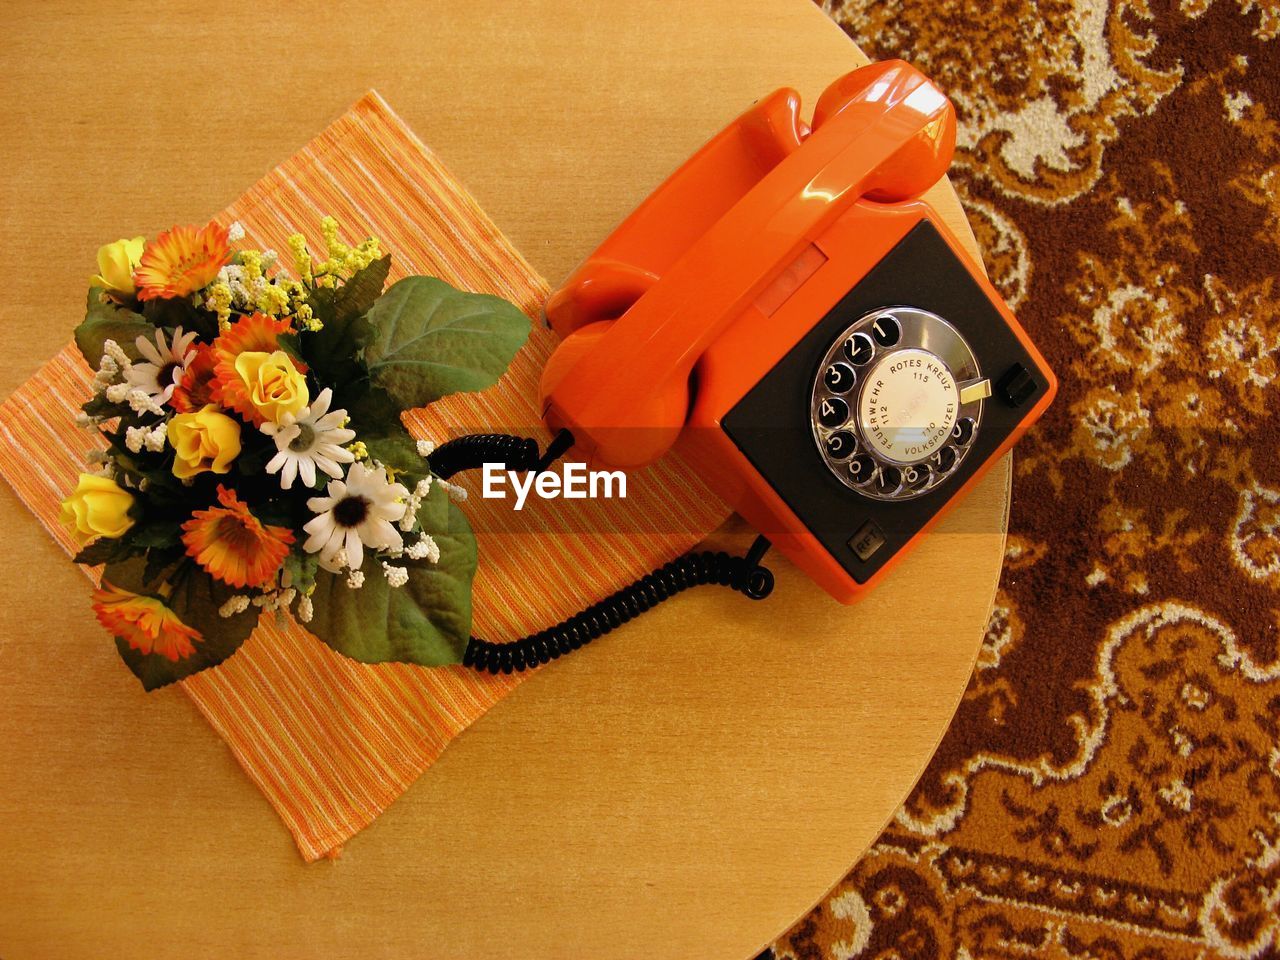 Directly above shot of orange old-fashioned telephone by flowers on table